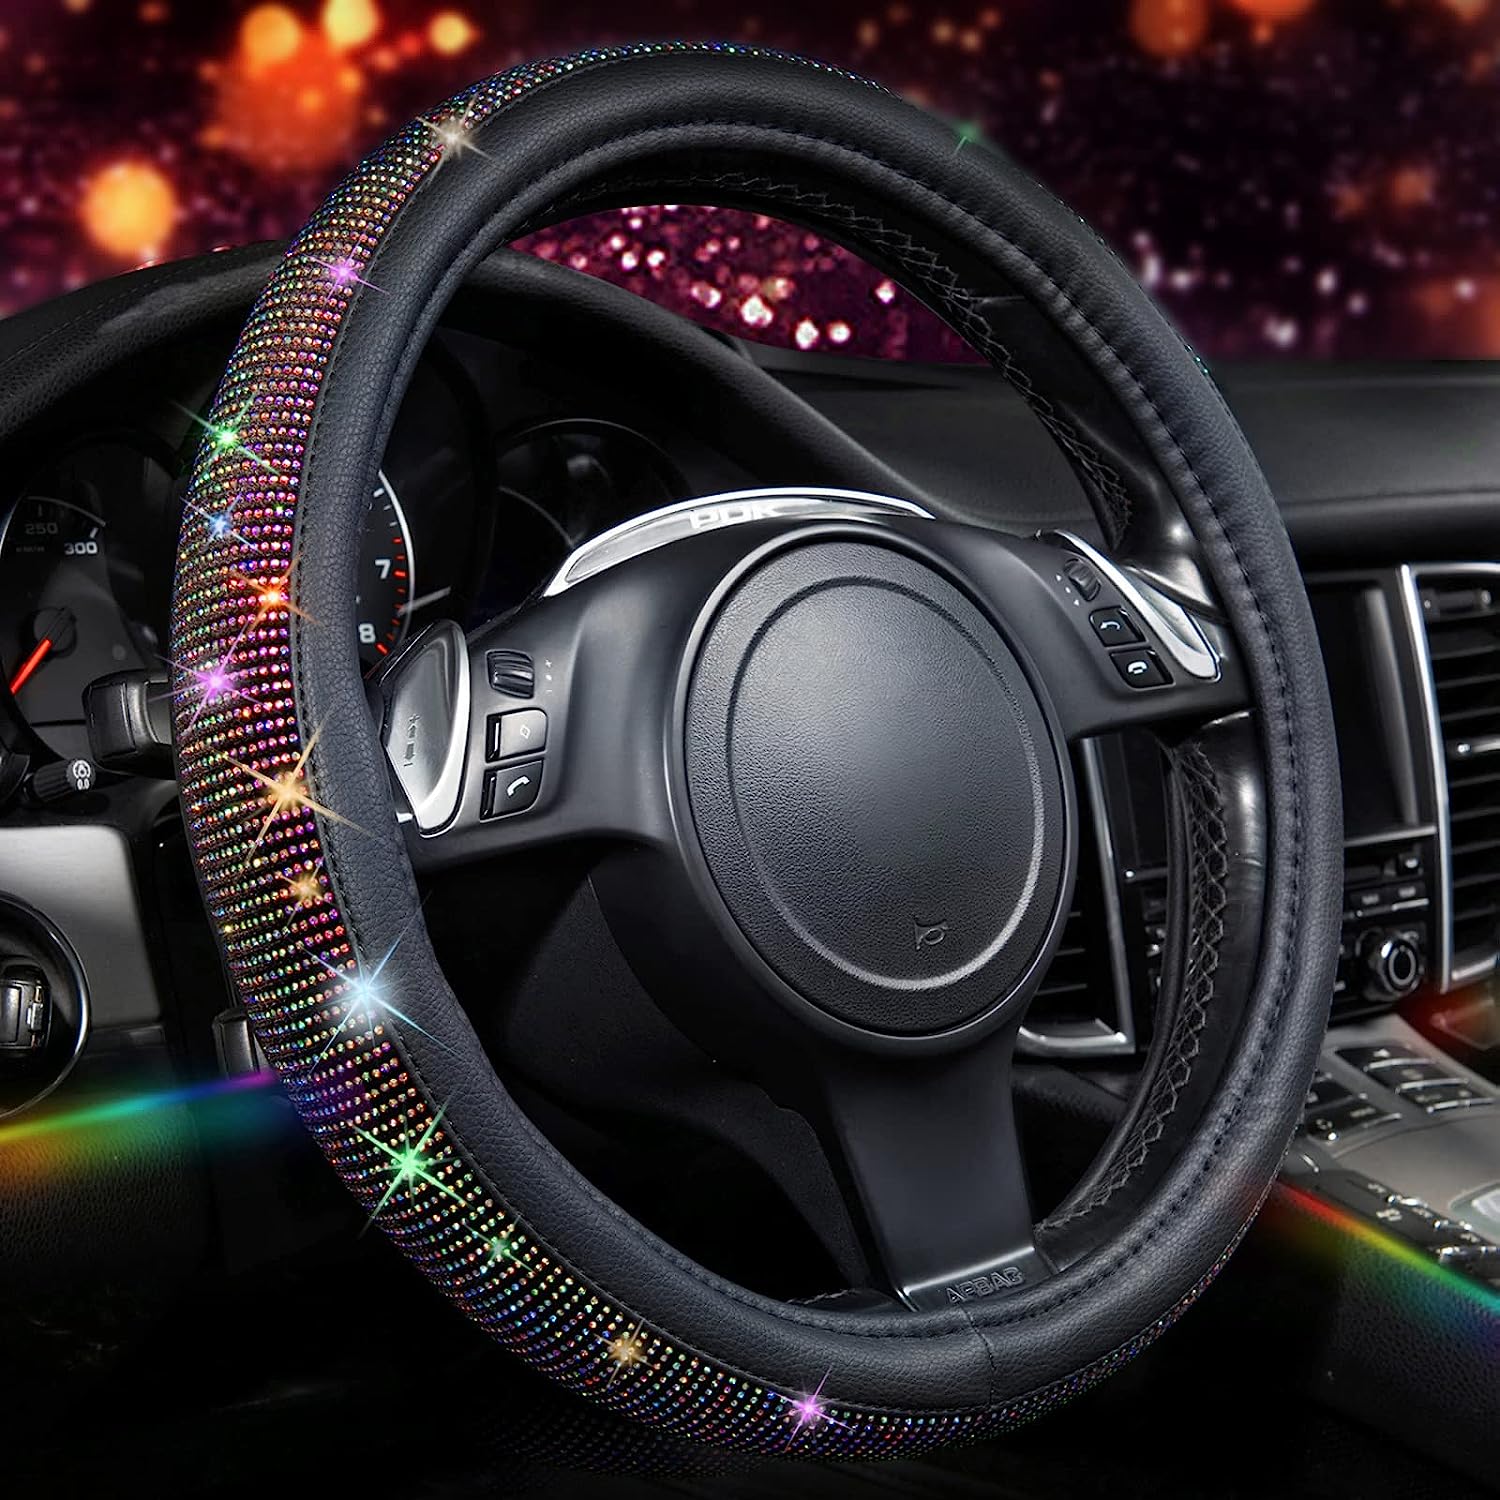 CAR PASS Diamond Leather Steering Wheel Cover & Iridescent Diamond &Nappa Calfskin Leather Cushioned,Bling seat Covers Fit for Auto SUV Sedan,Sparkly Glitter Shining Rhinestone, Multicolor